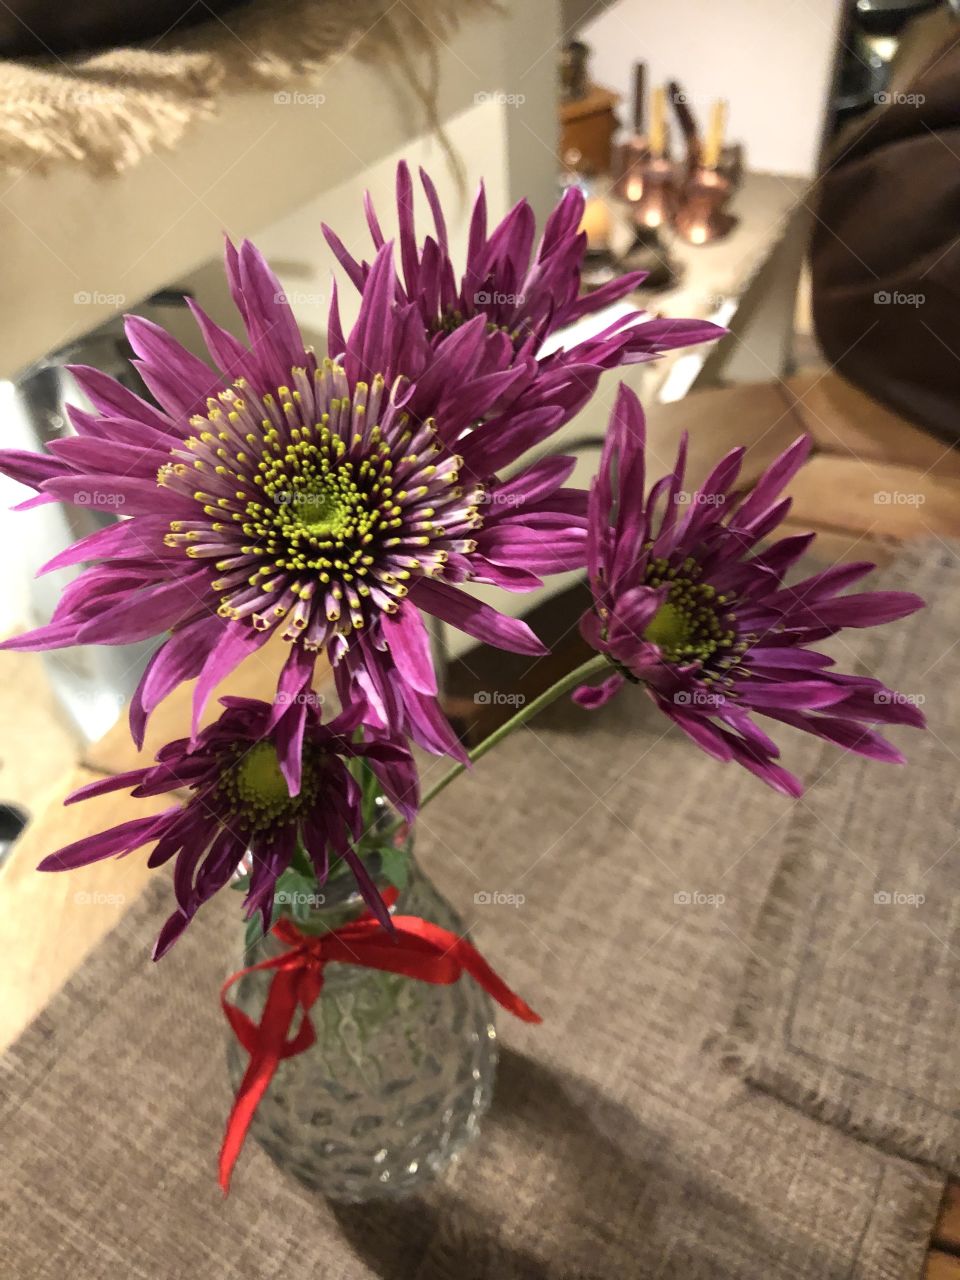 Flowers for table decoration